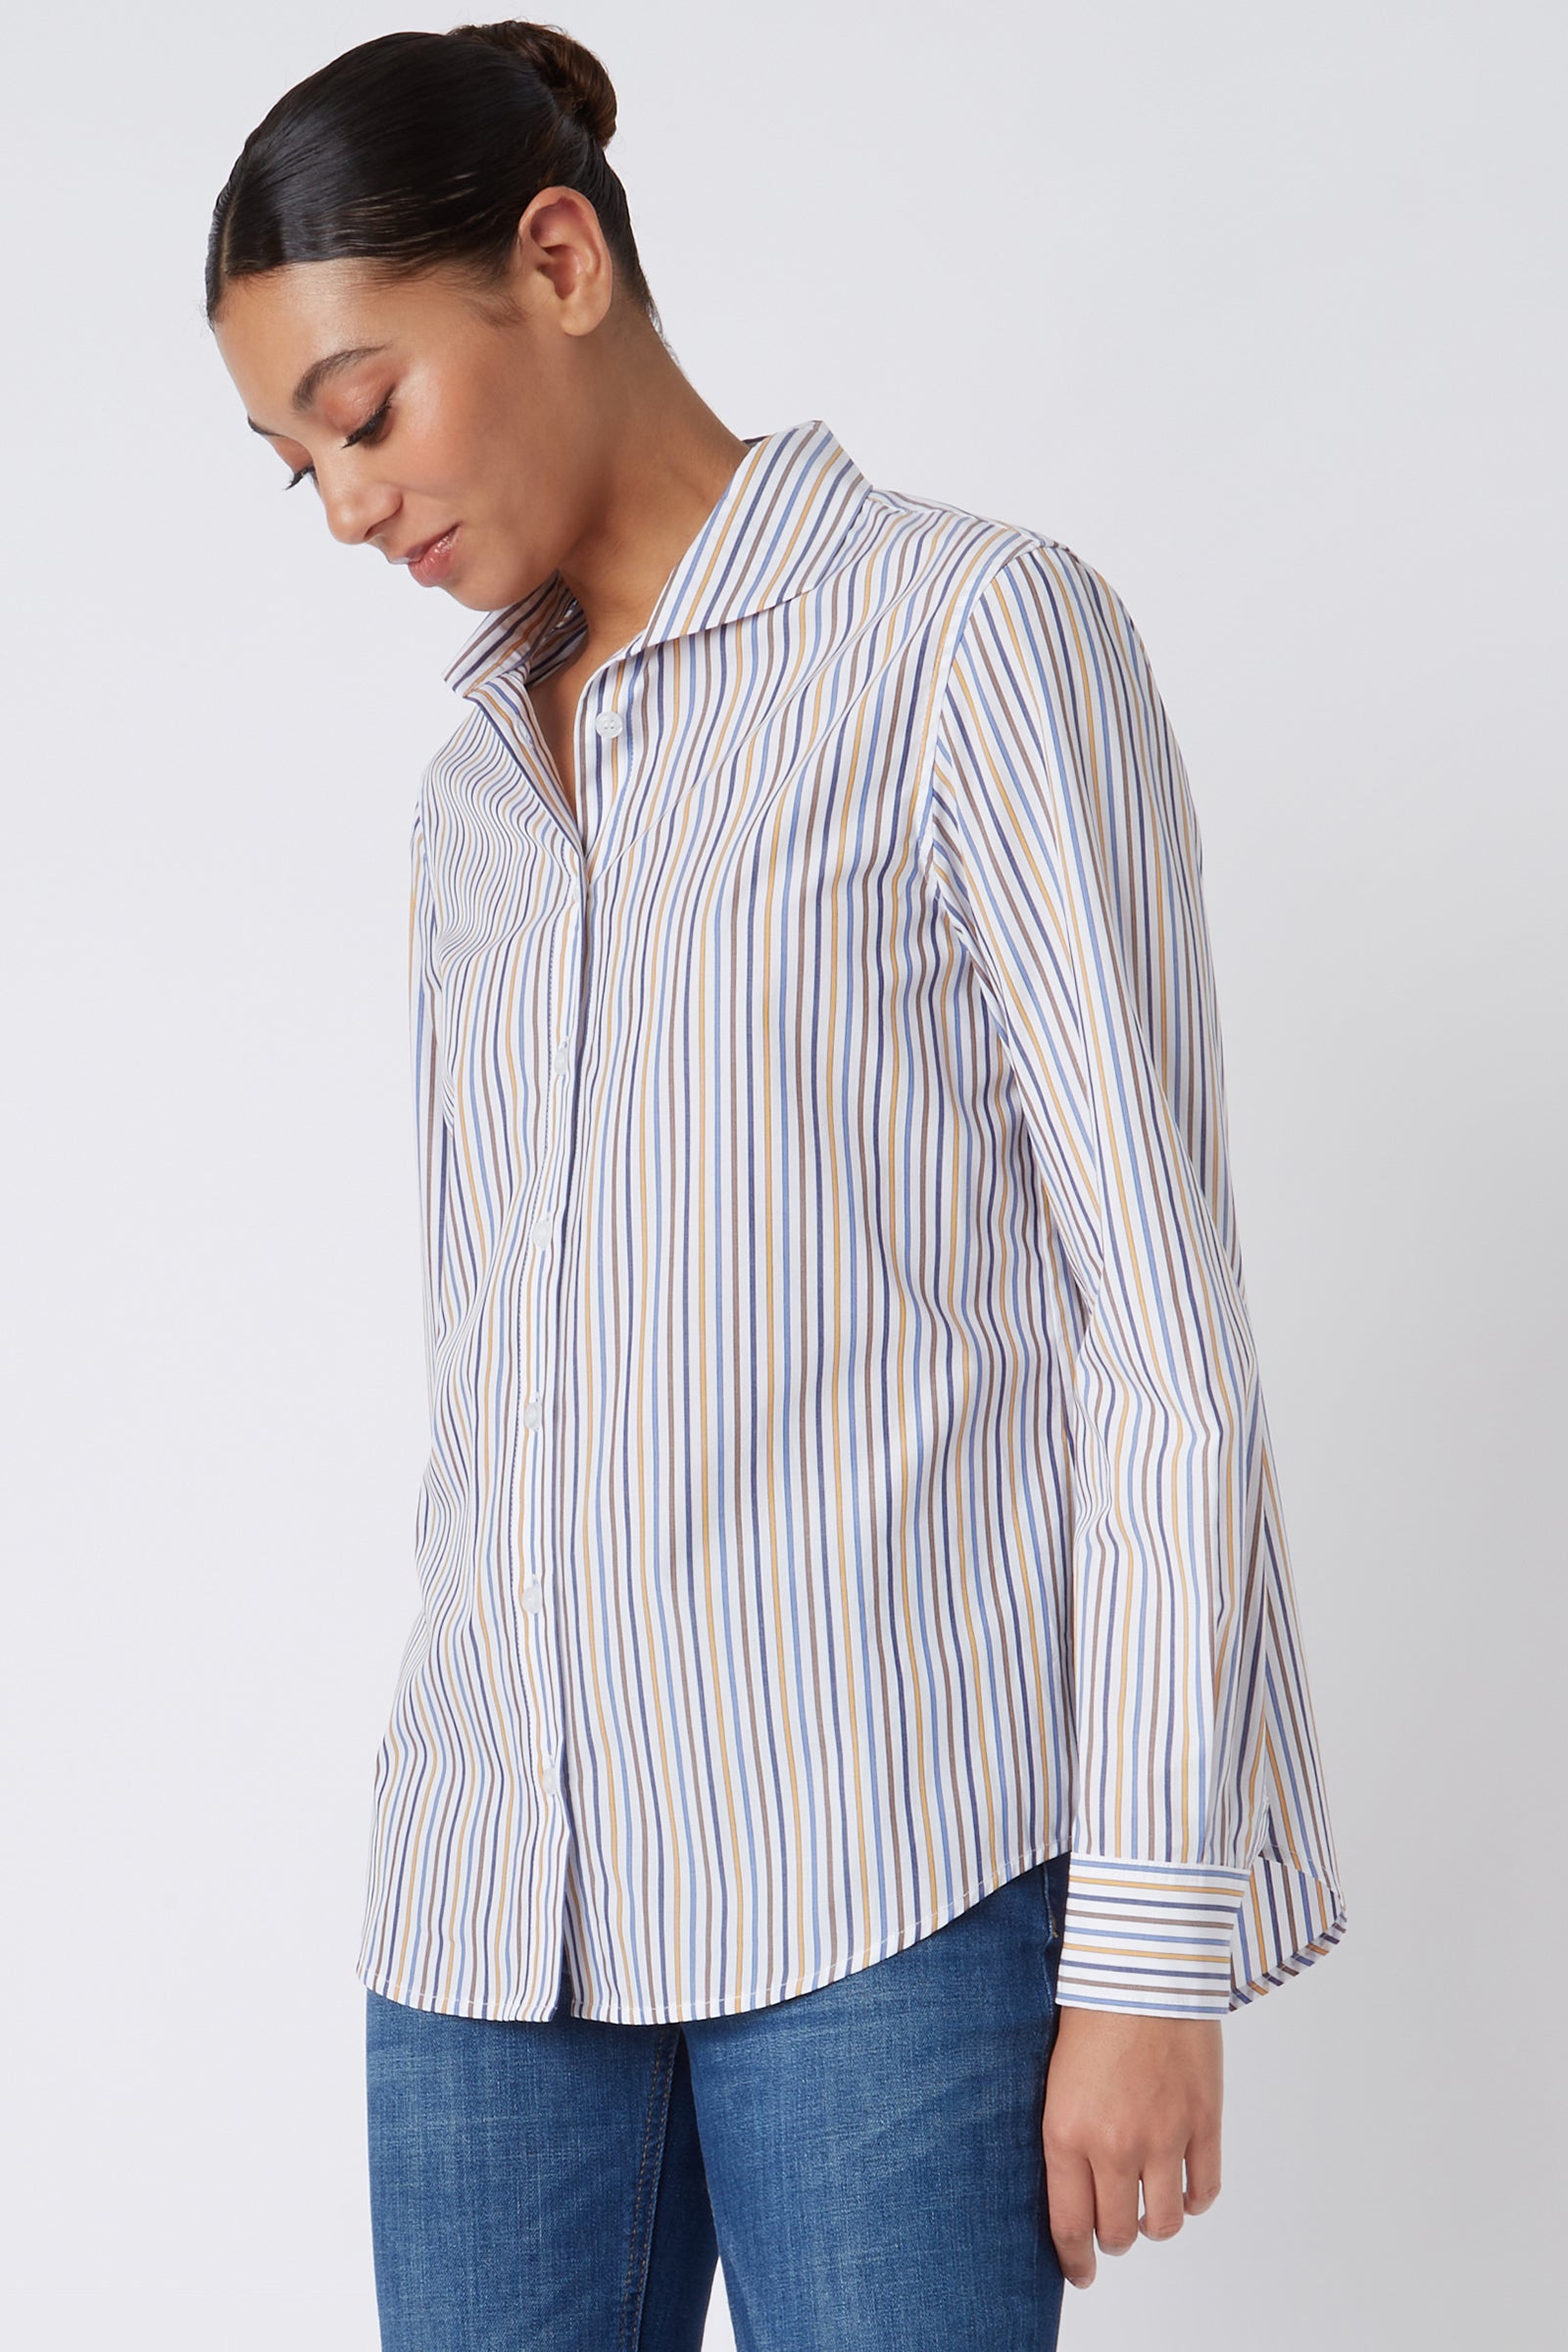 Kal Rieman Ginna Box Pleat Shirt in Multi Stripe Gold on Model Looking Down Cropped Front View